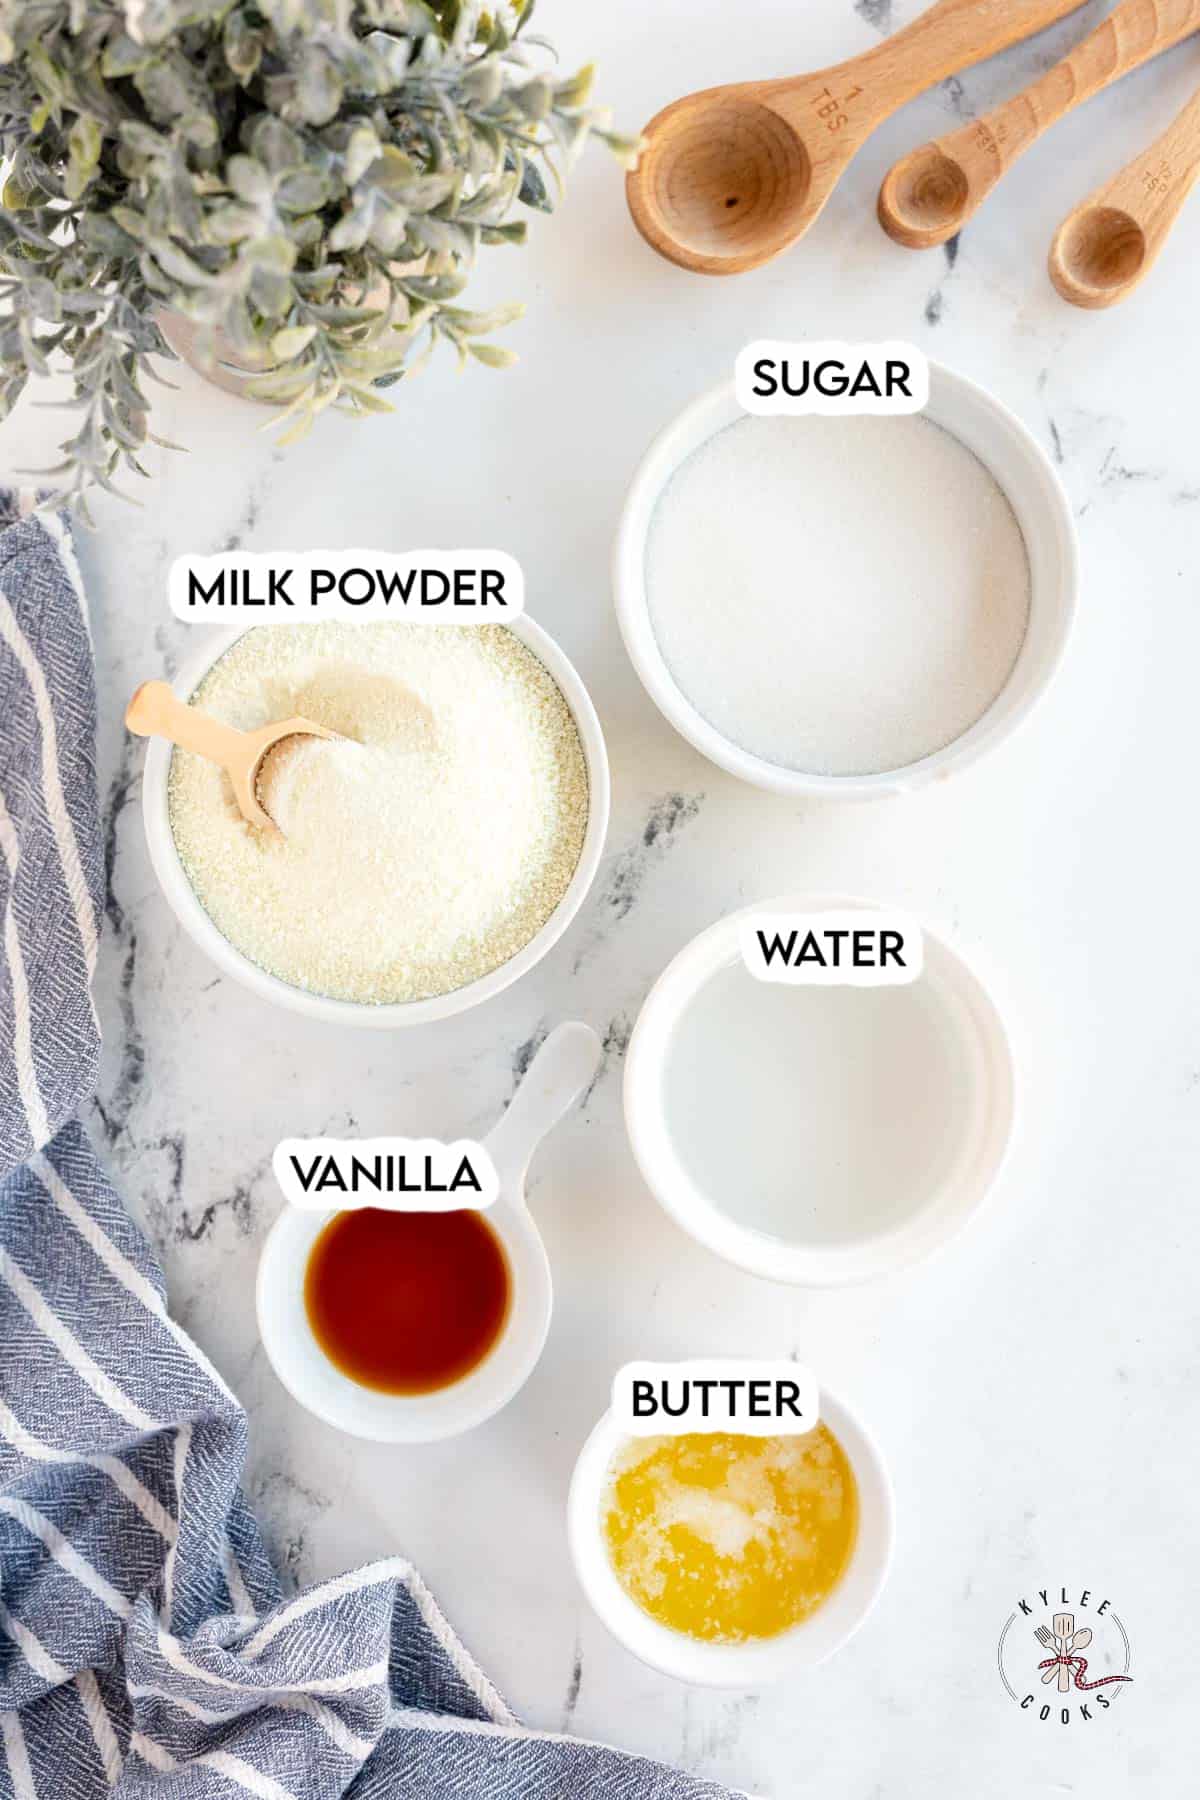 ingredients to make sweetened condensed milk laid out and labeled.